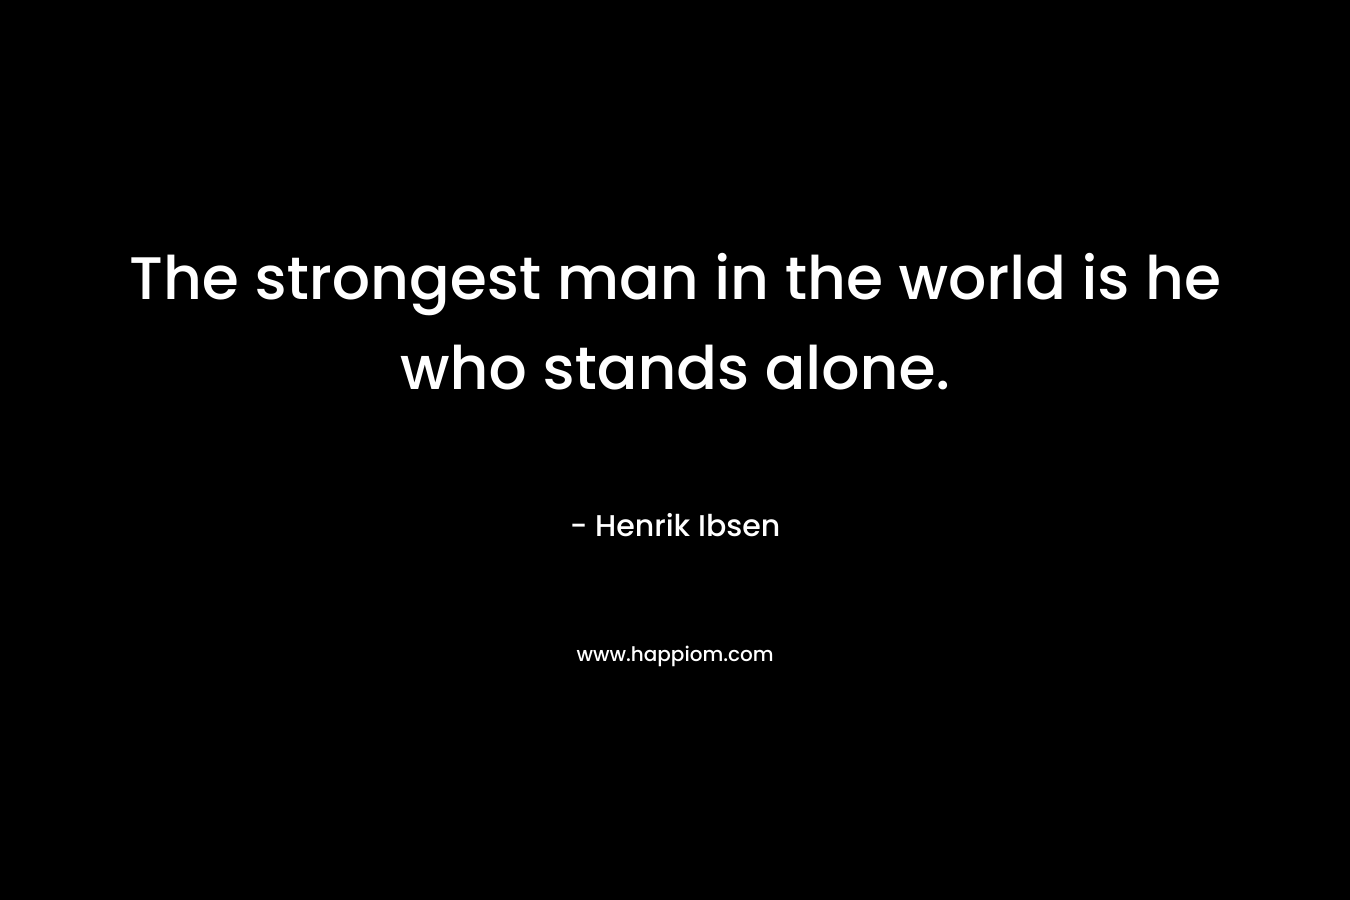 The strongest man in the world is he who stands alone. – Henrik Ibsen